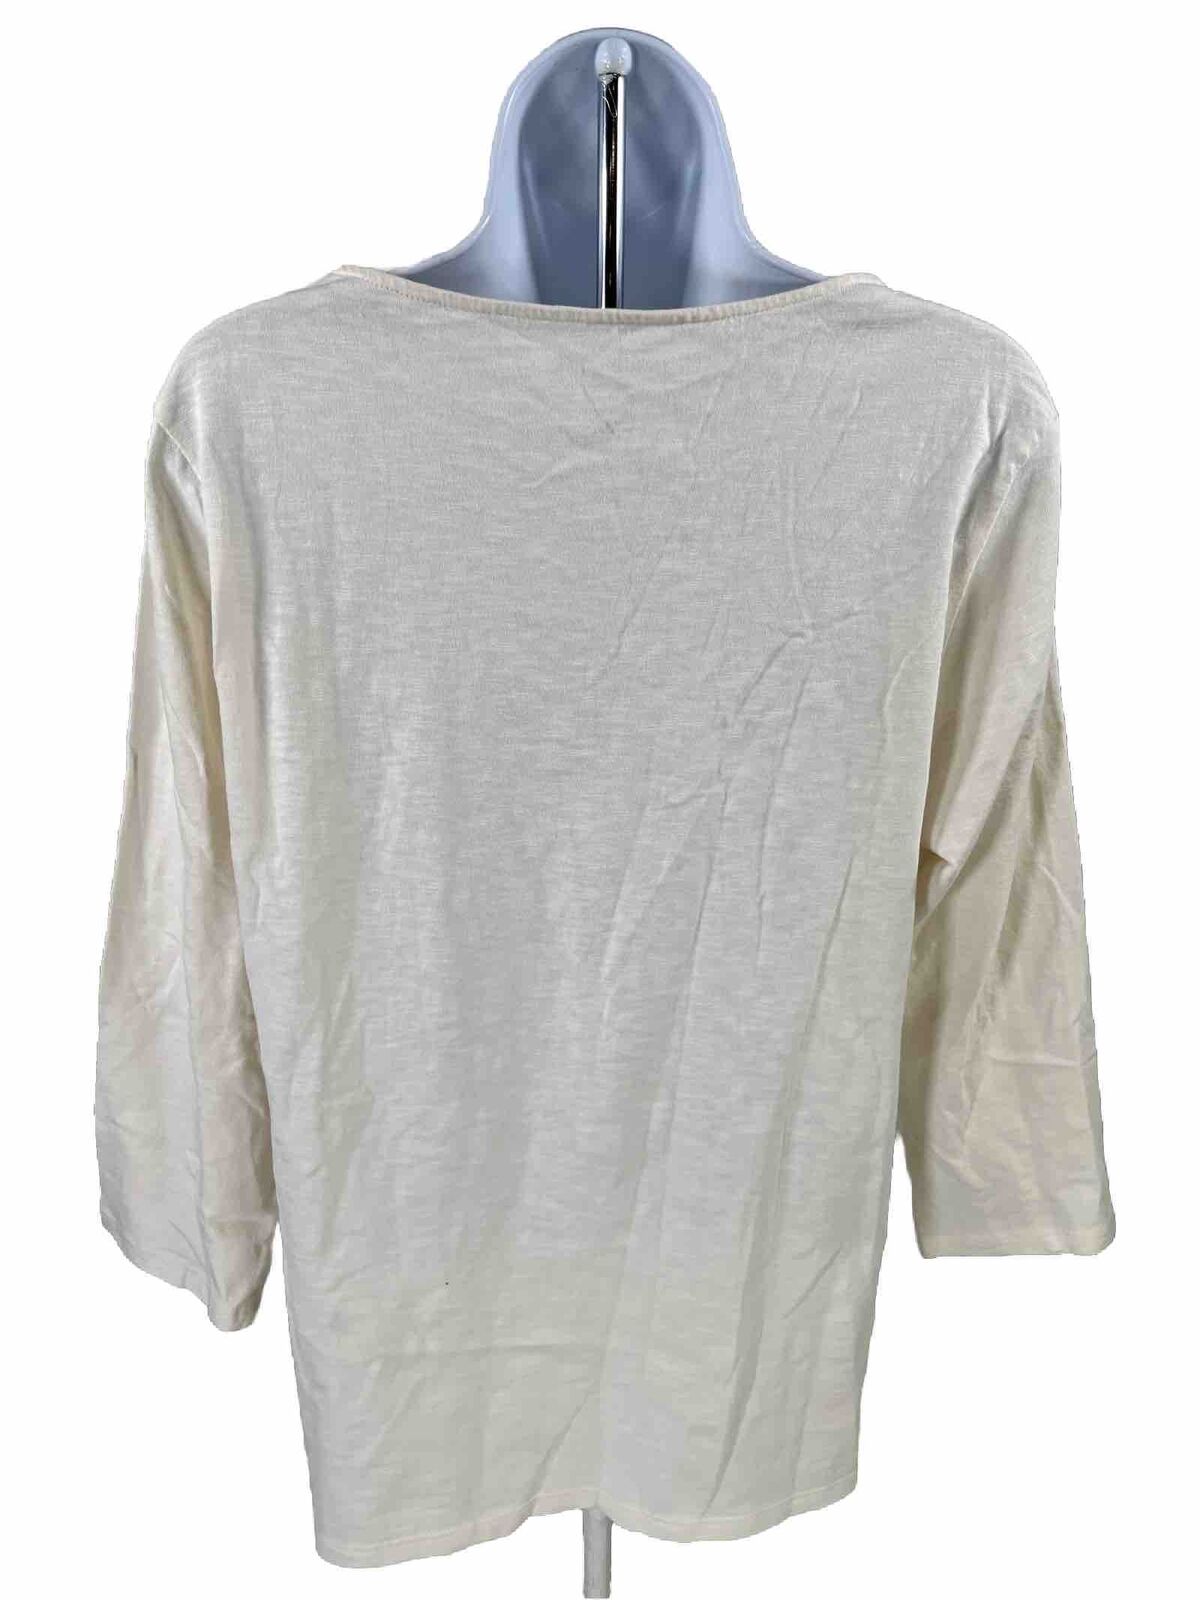 NEW Coldwater Creek Women's Ivory 3/4 Sleeve T-Shirt - L/14